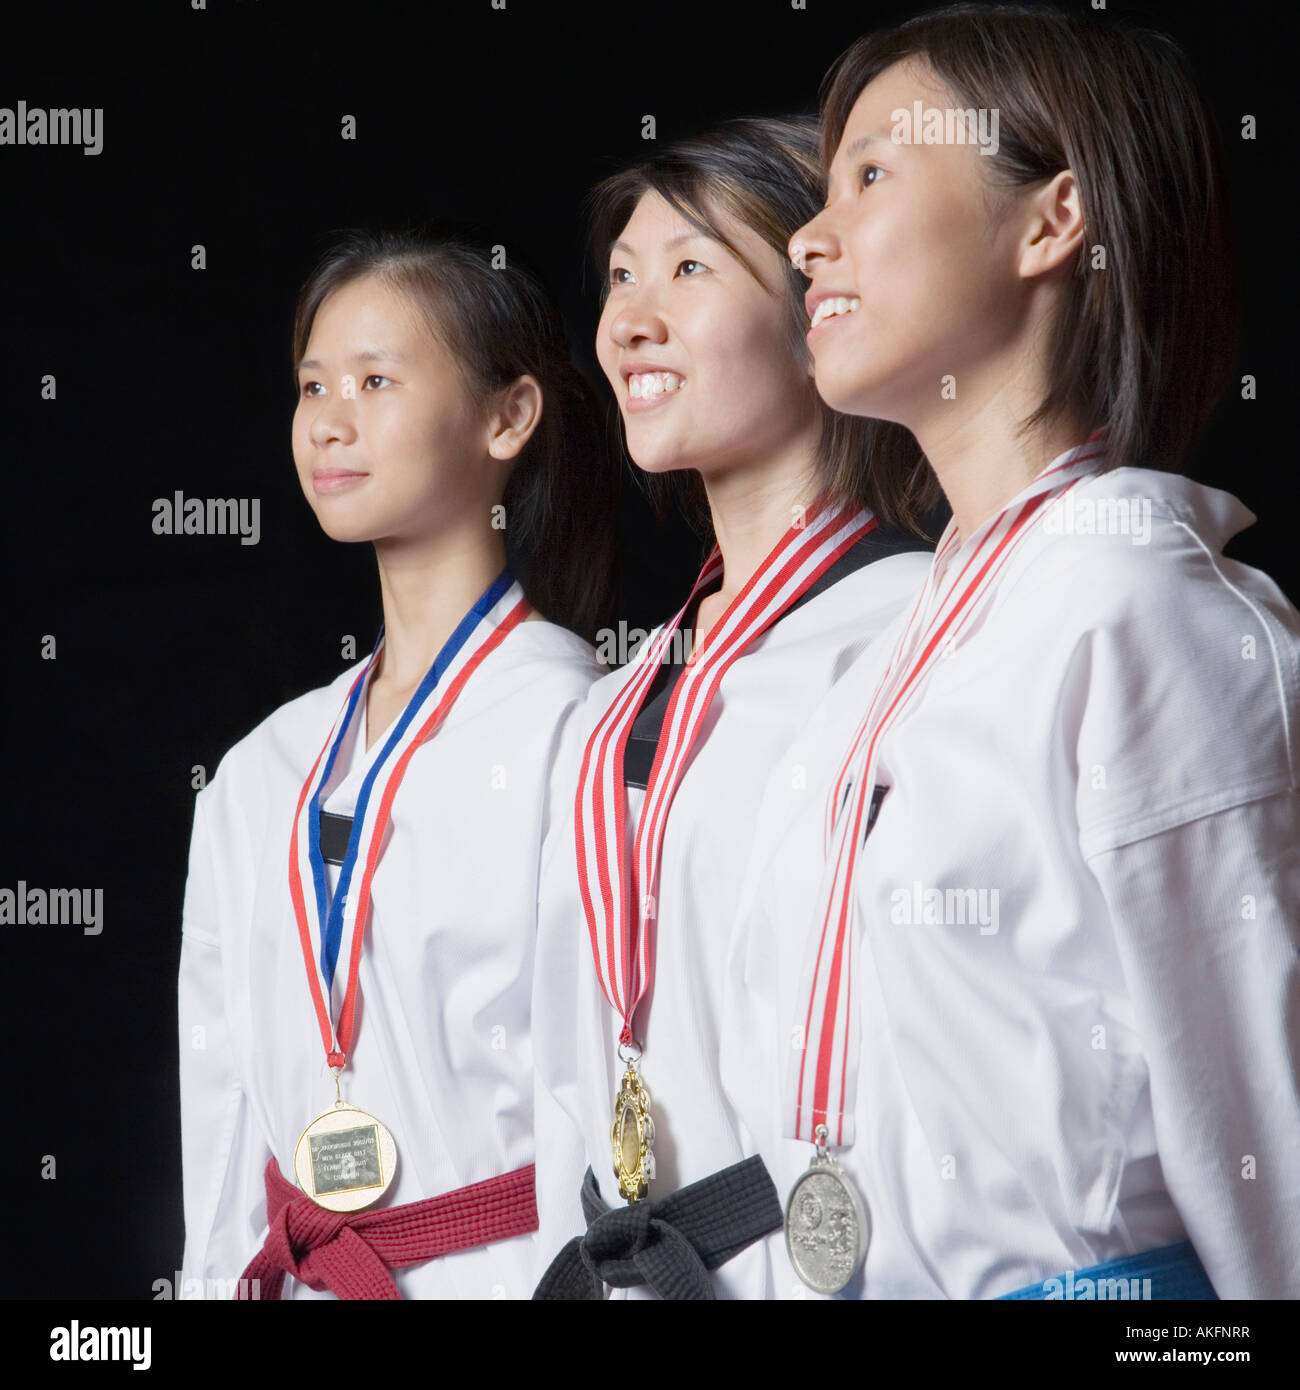 Three young women standing with their medals and smiling Stock Photo